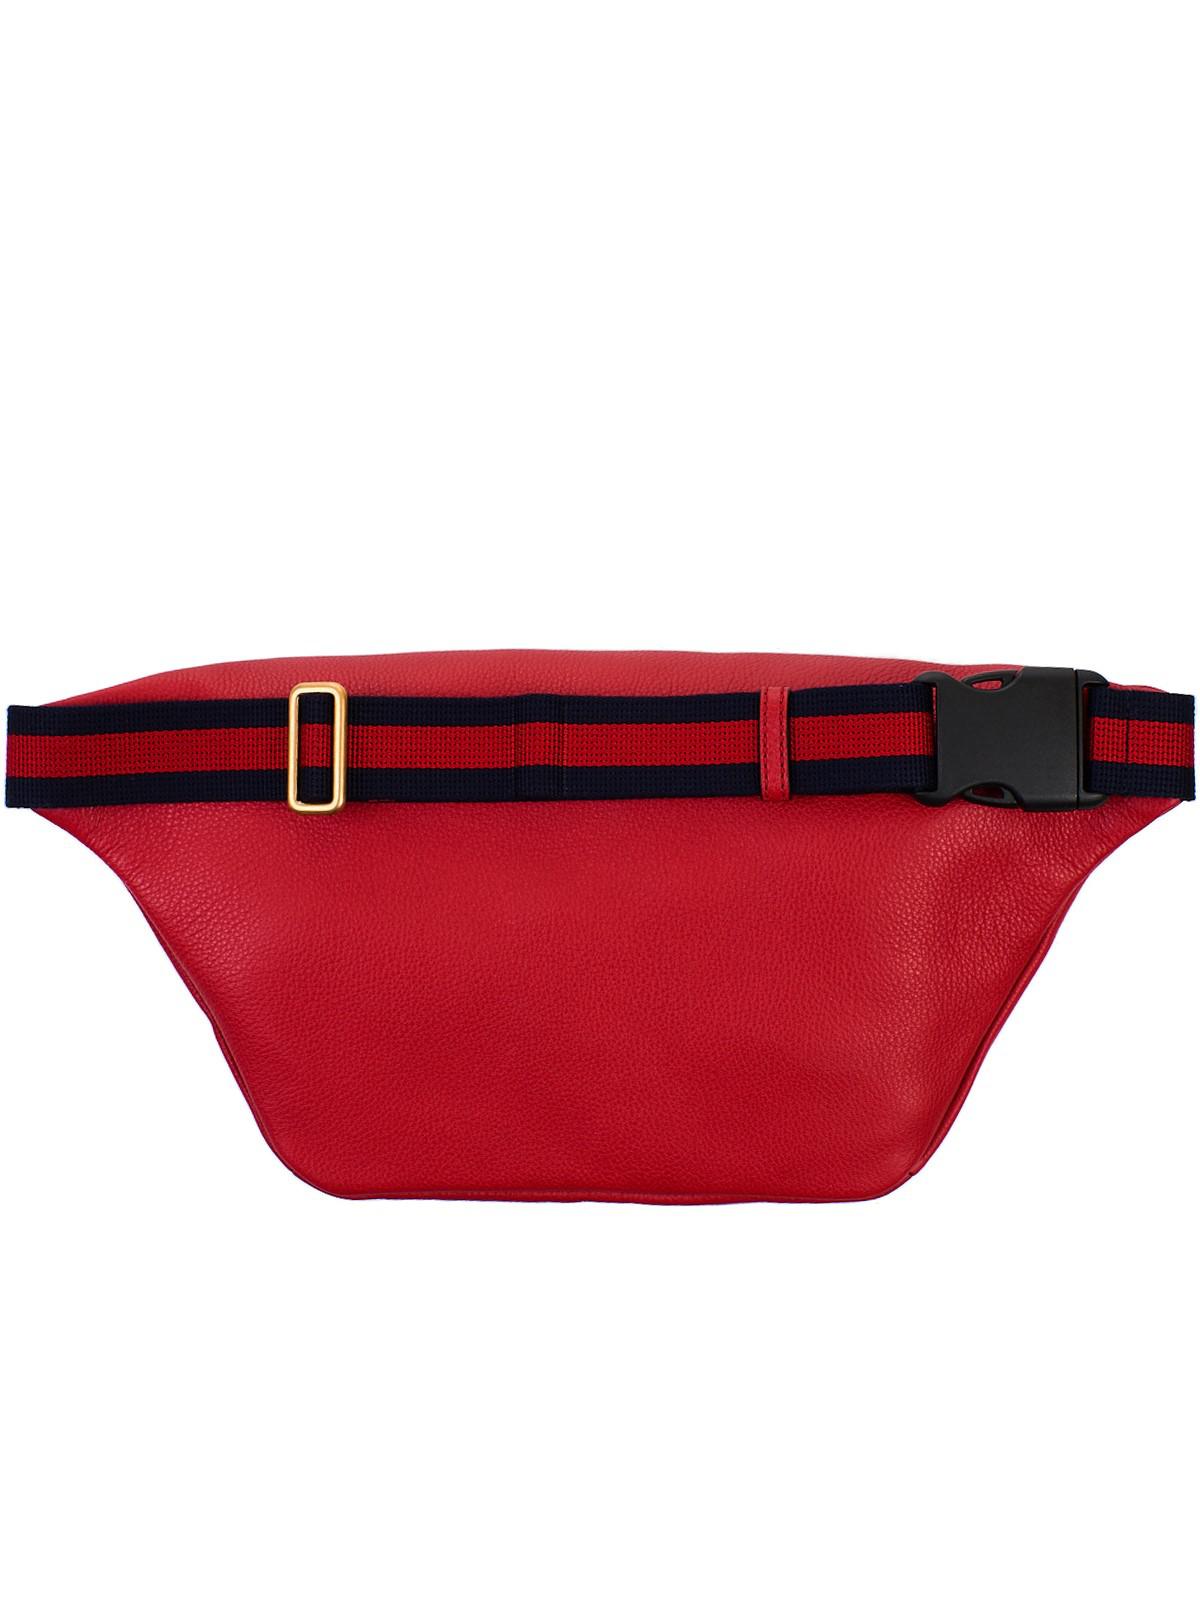 gucci butterfly fanny pack